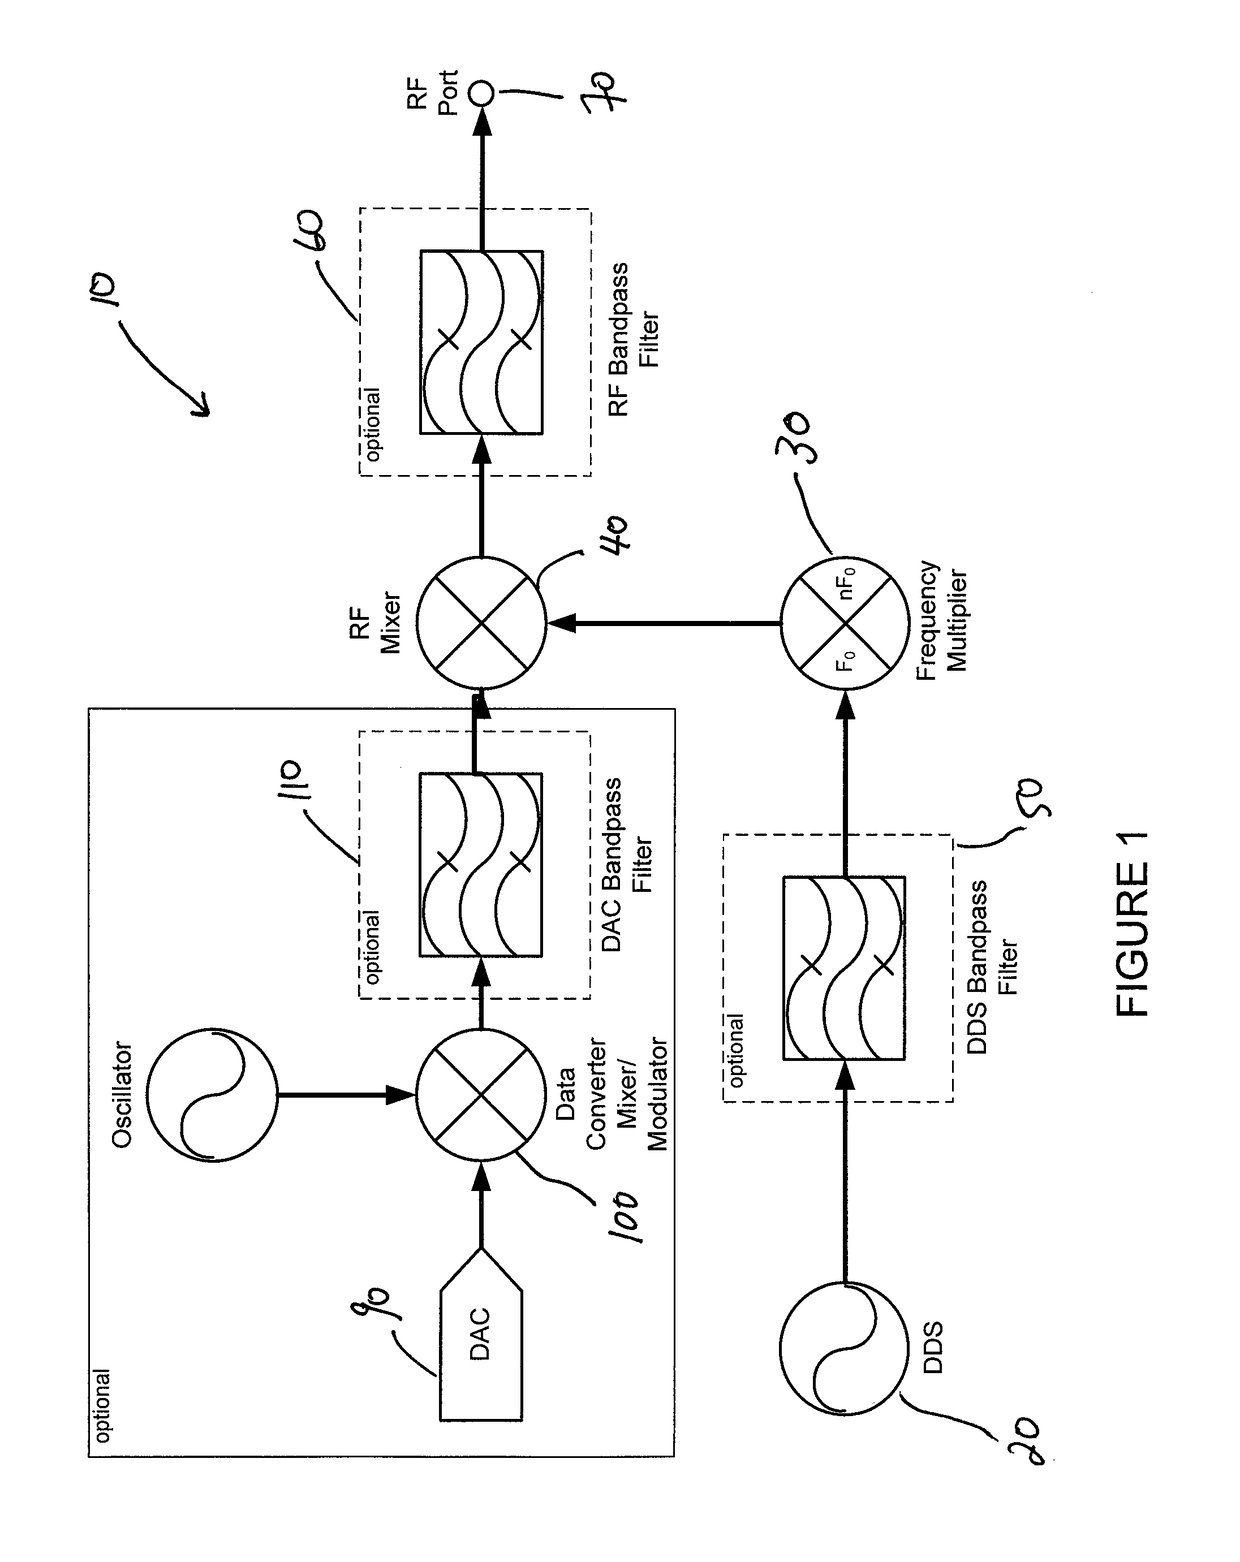 System and method for ultra wideband radio frequency scanning and signal generation